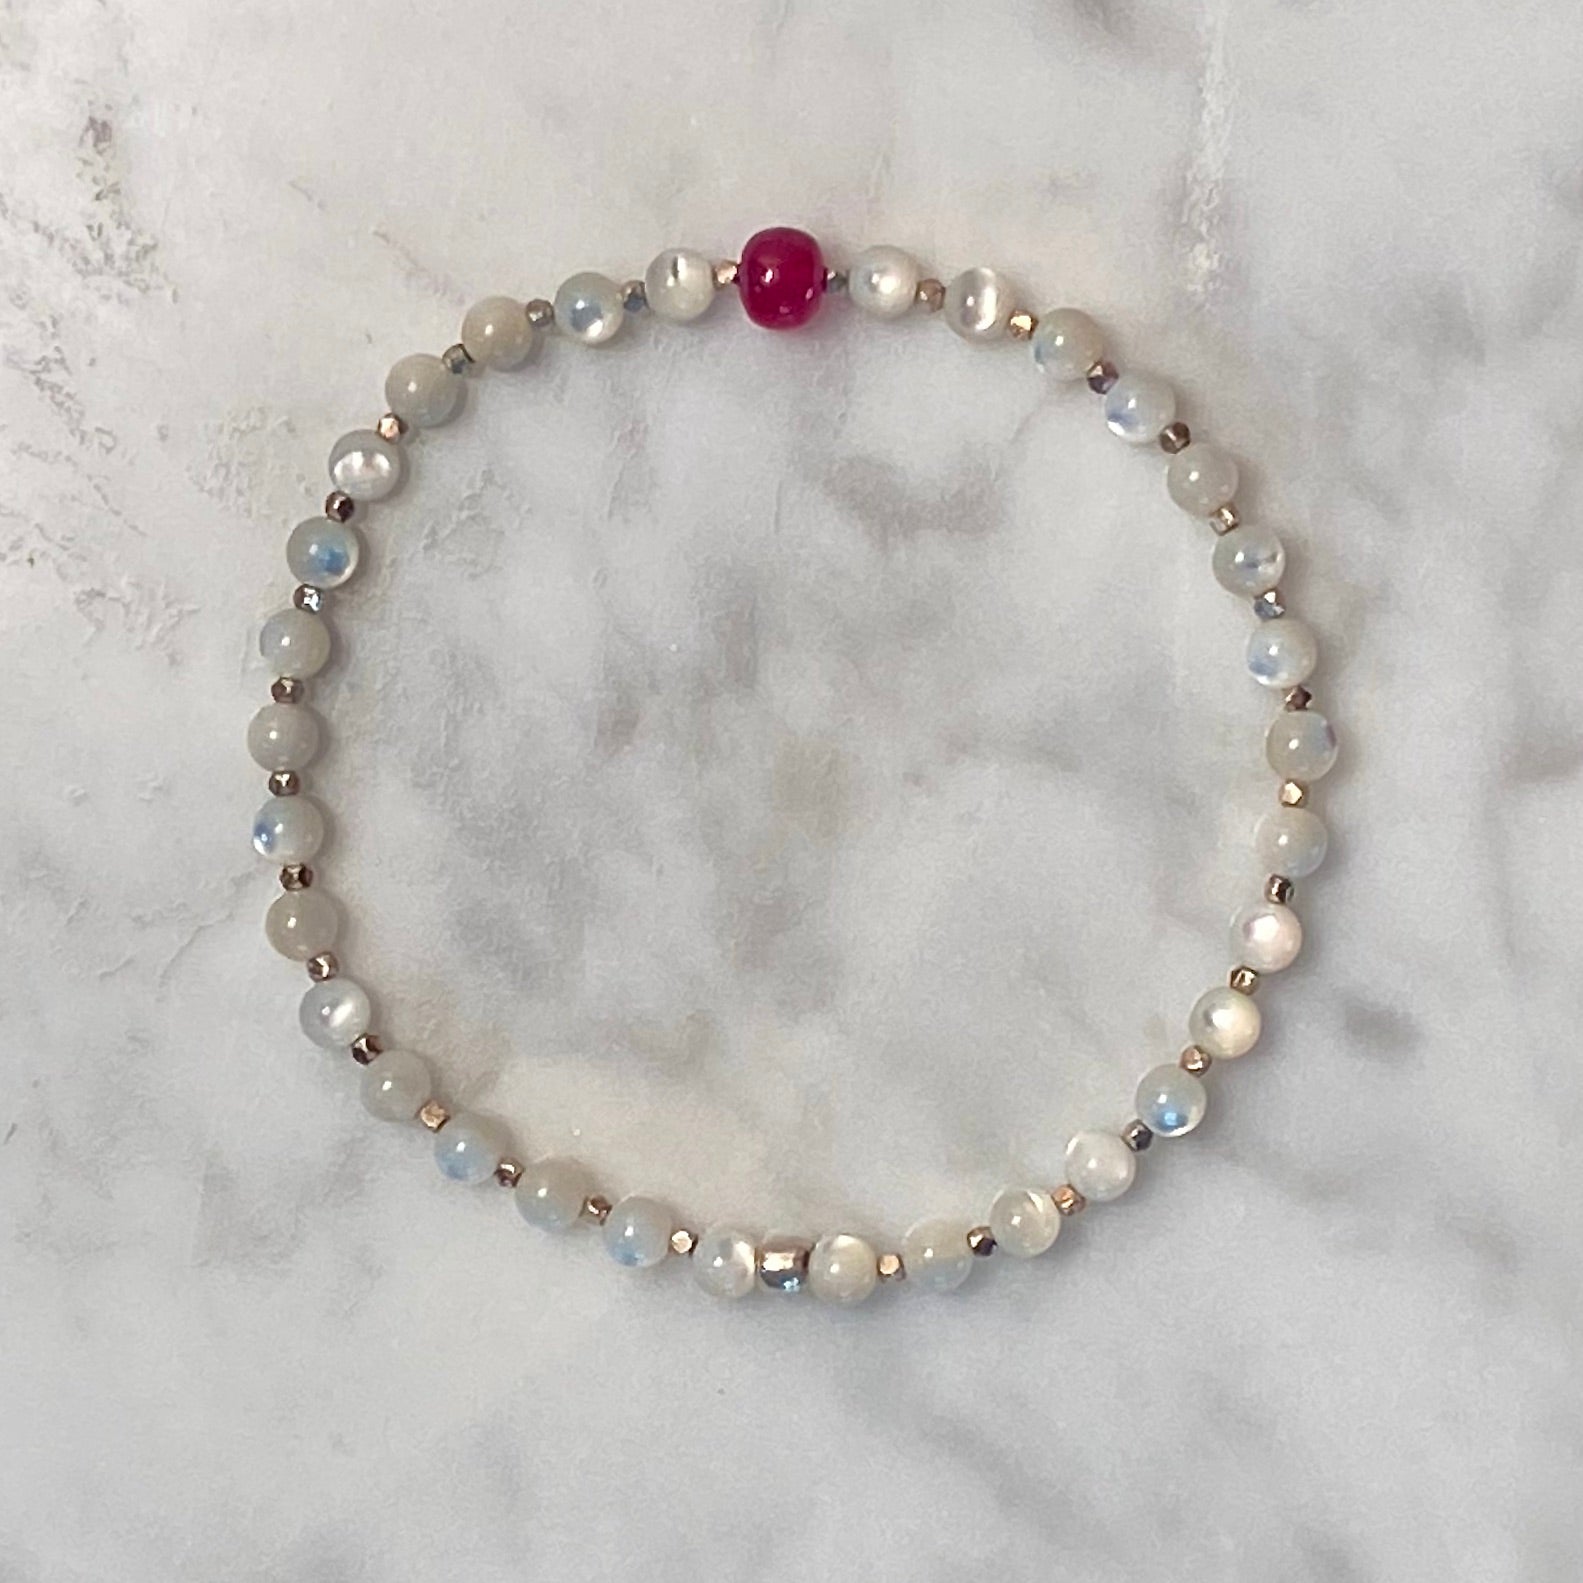 7-1/3" Arpaia gemstone stretch bracelet with natural ruby , mother or pearl, and 999 fine silver beads